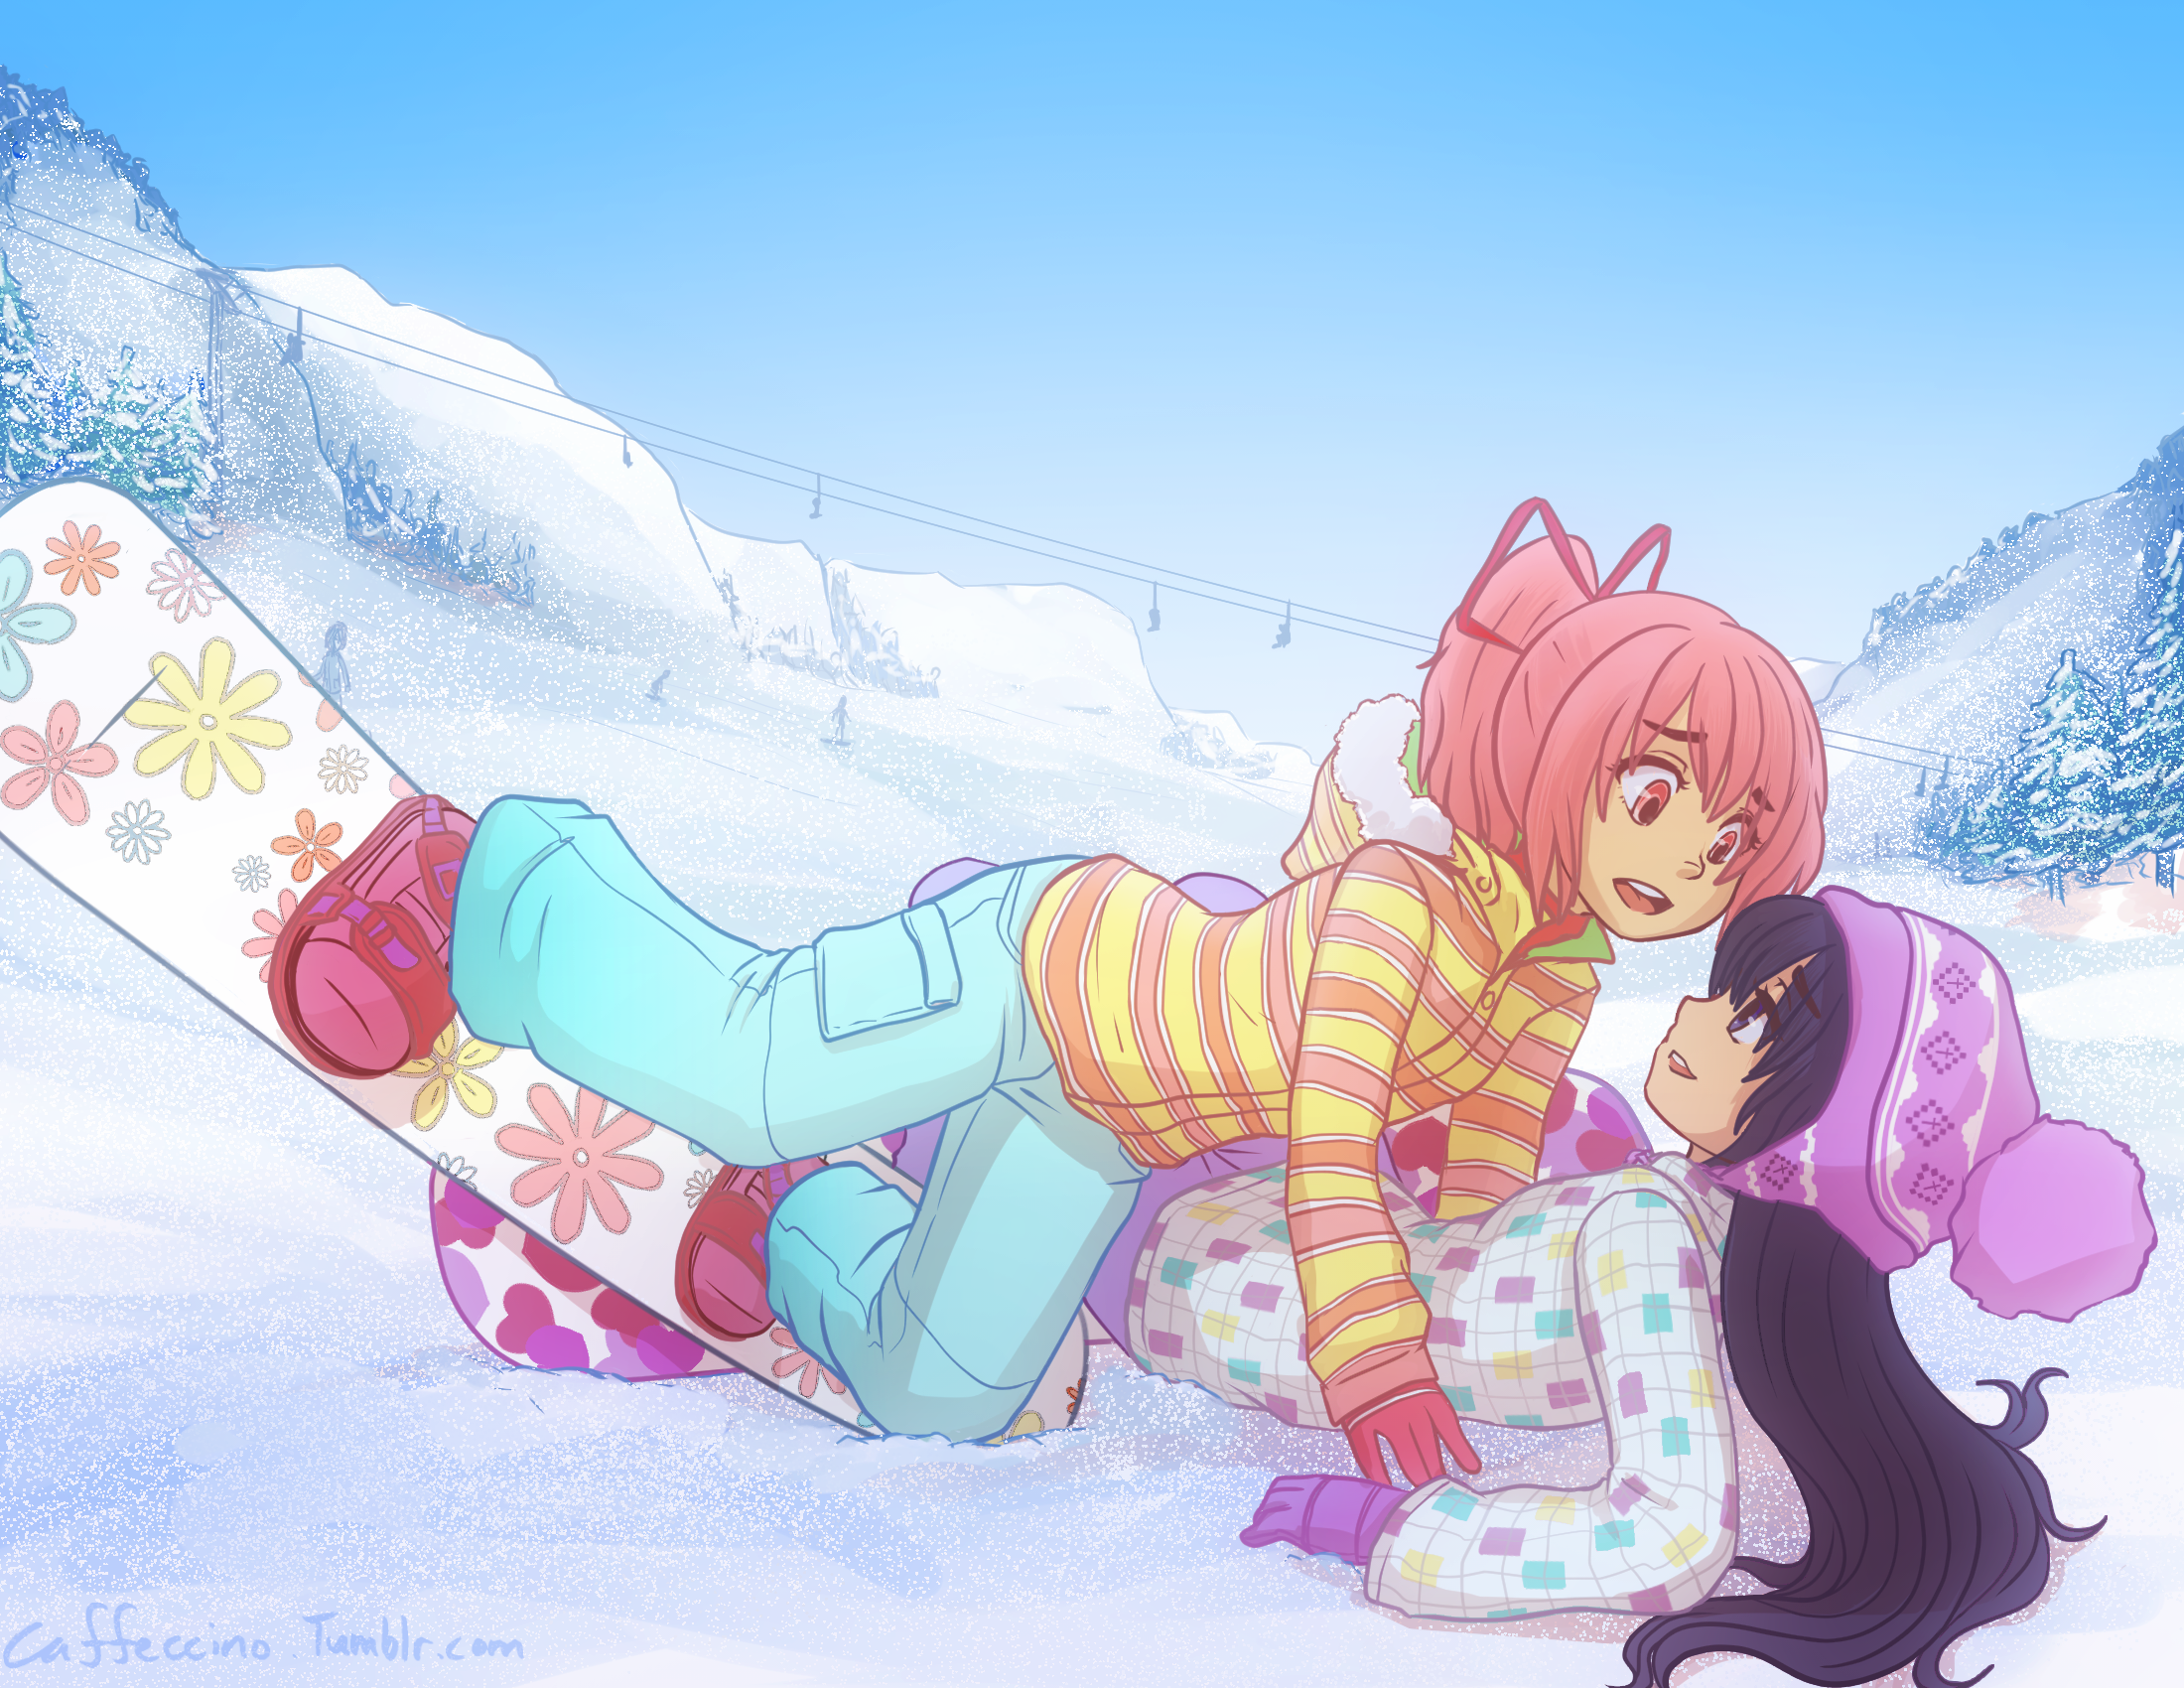 madohomu_snowboarding_by_caffeccino-d8ndnnw